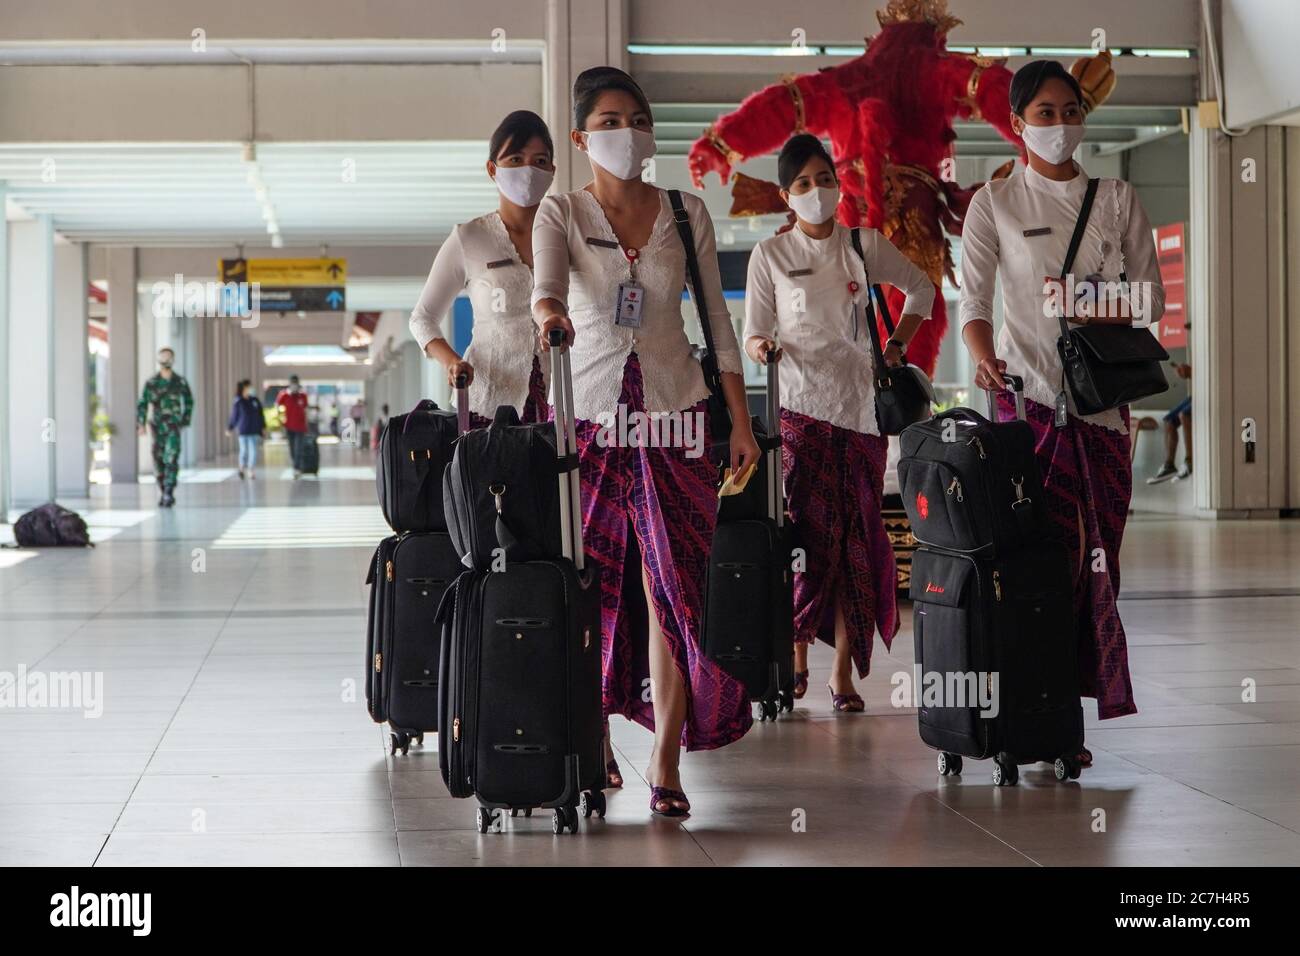 Badung Bali Indonesia 17th July 2020 A Group Of Flight Attendant Women Walks Along The Airport